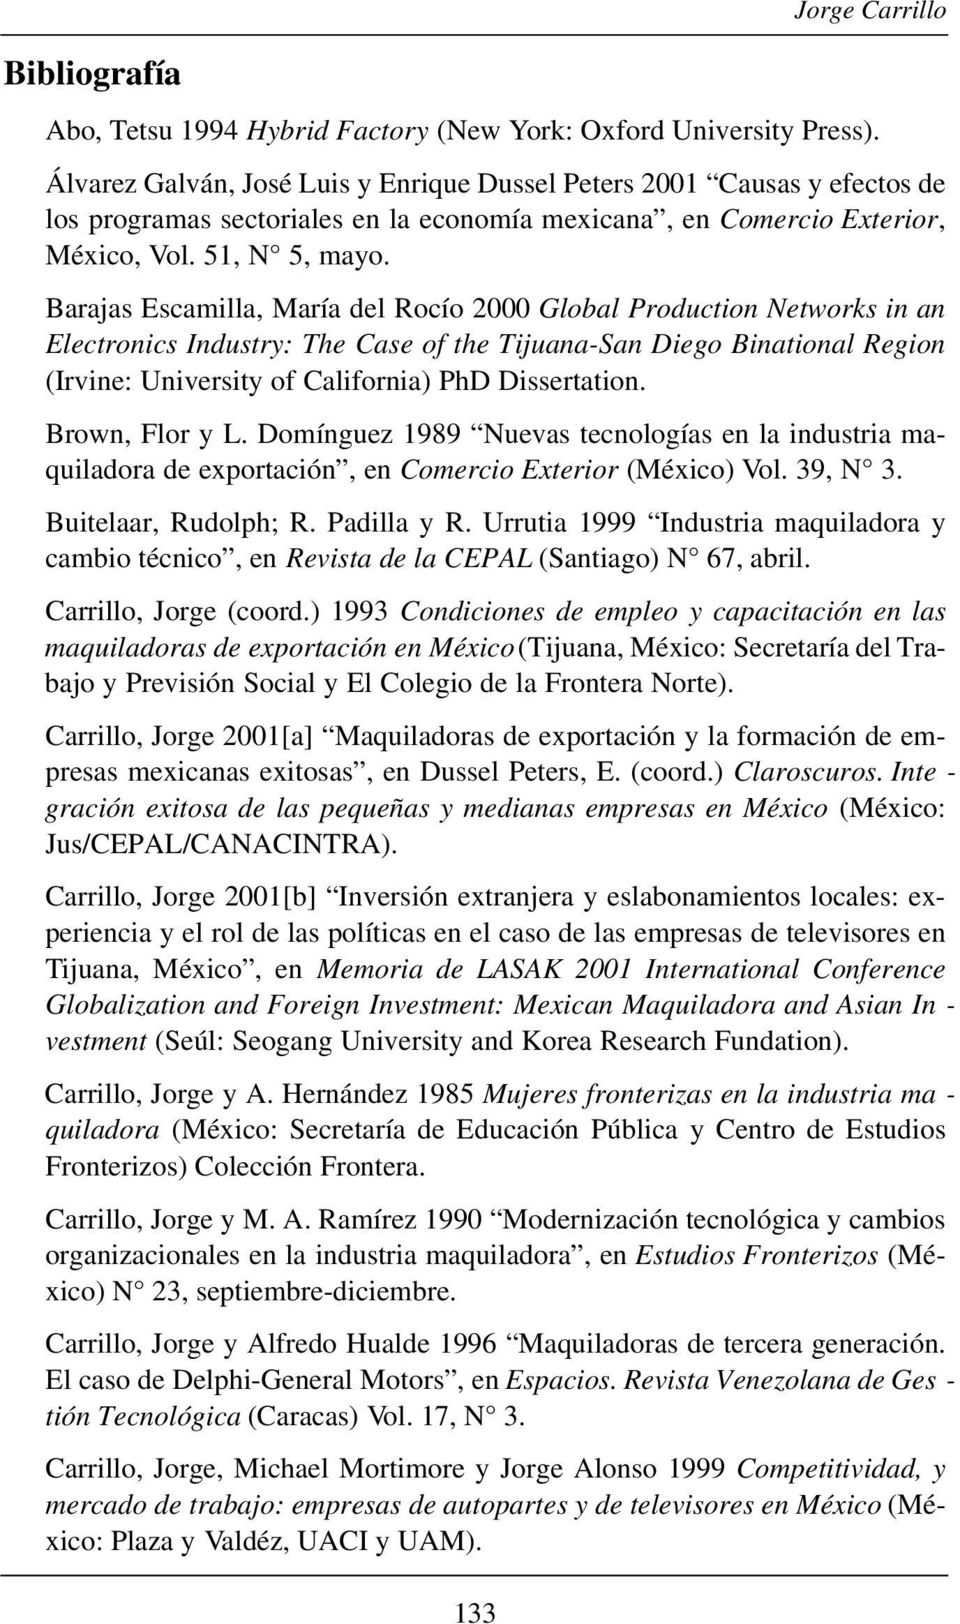 Barajas Escamilla, María del Rocío 2000 Global Production Networks in an Electronics Industry: The Case of the Tijuana-San Diego Binational Region (Irvine: University of California) PhD Dissertation.